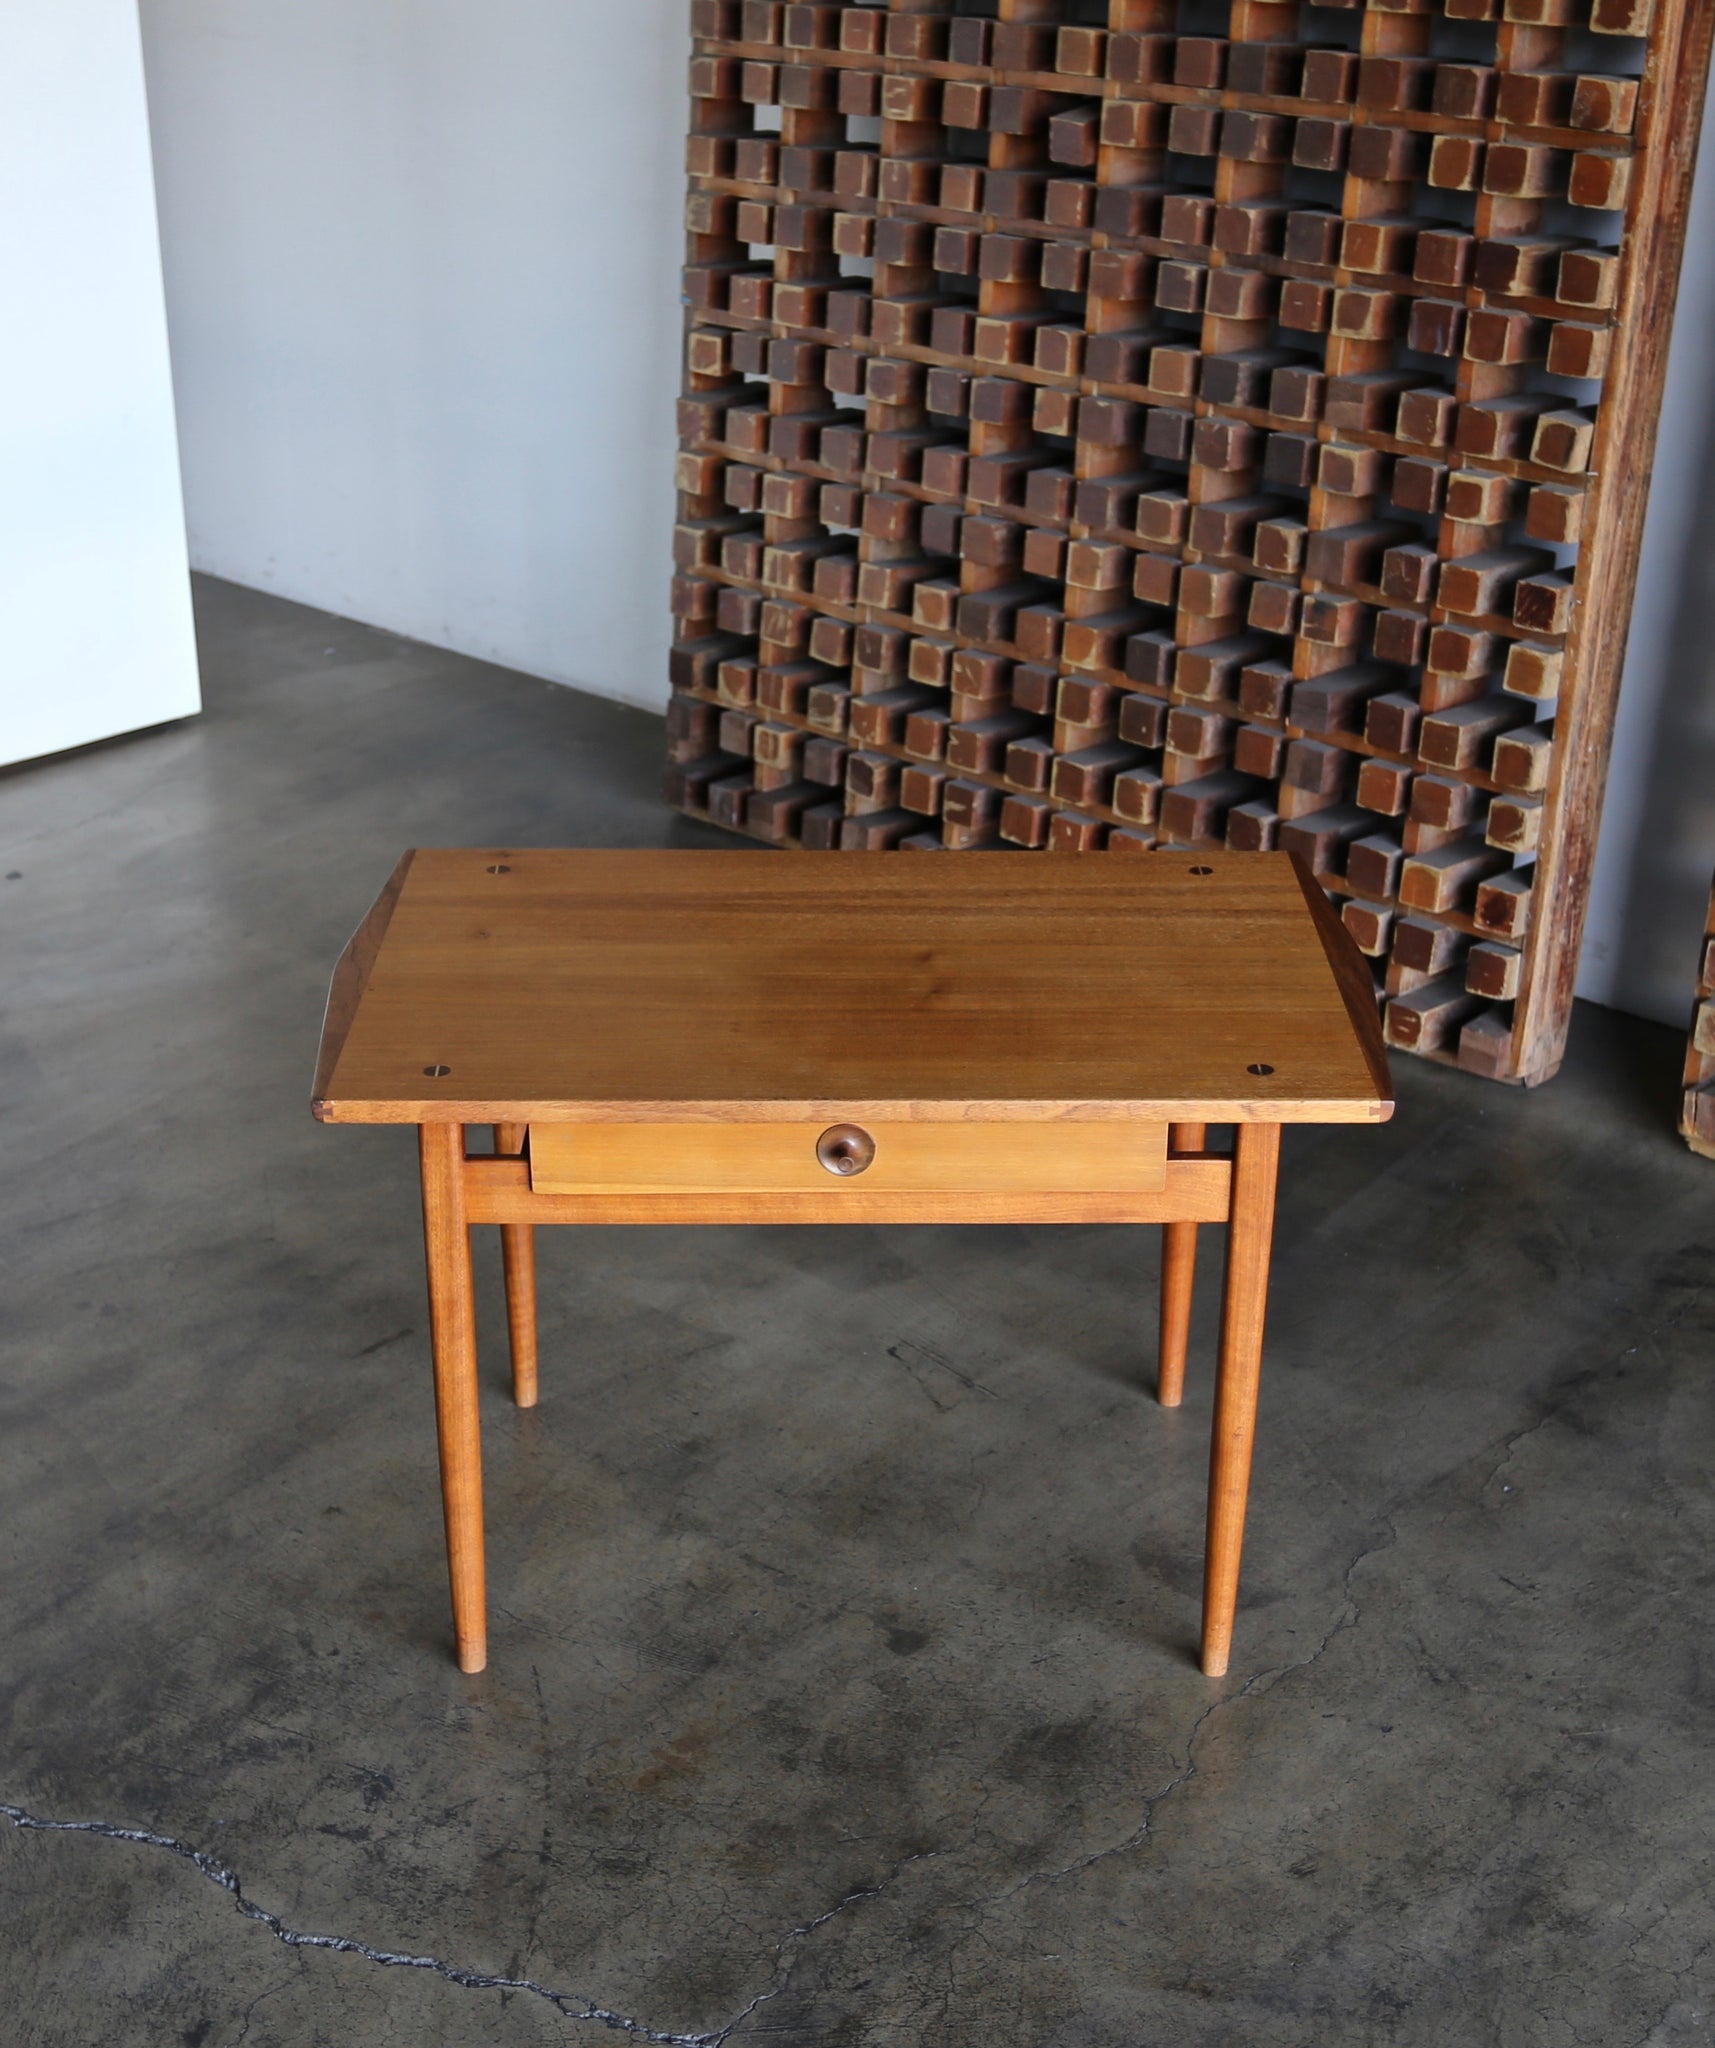 = SOLD = John Kapel Hand Crafted Side / Entry Table circa 1956